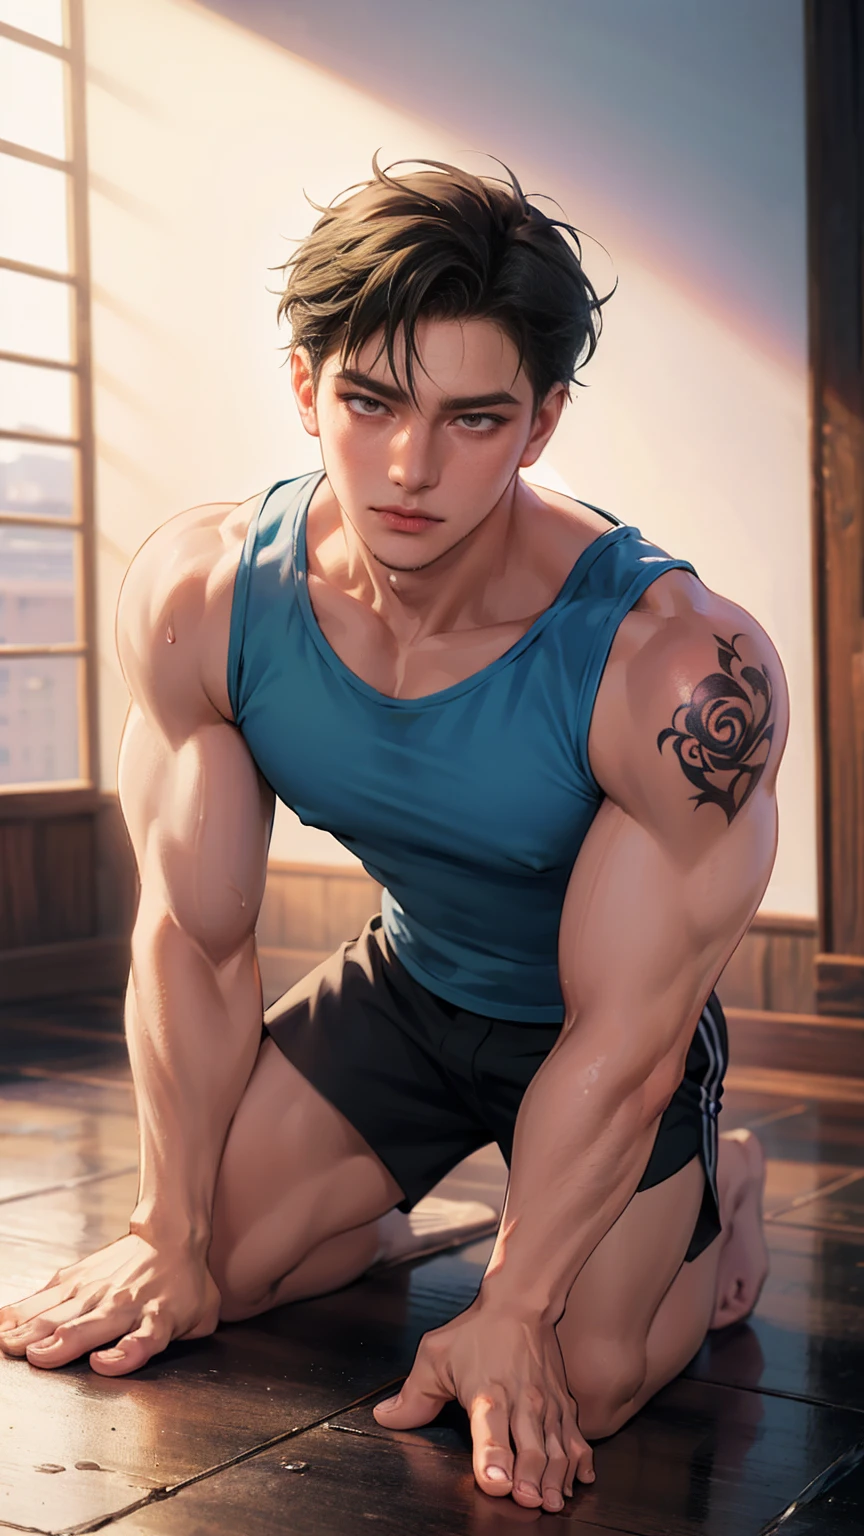 (8K, best quality, masterpiece:1.2),(best quality:1.0), (Ultra-high resolution:1.0),(Delicate facial features:1.0),cartoon, A muscular man, Tattoo,shorts,Sleeveless shirt,slippers,Kneeling on the ground,Sweating,Soaked,Malu,Full body portrait,